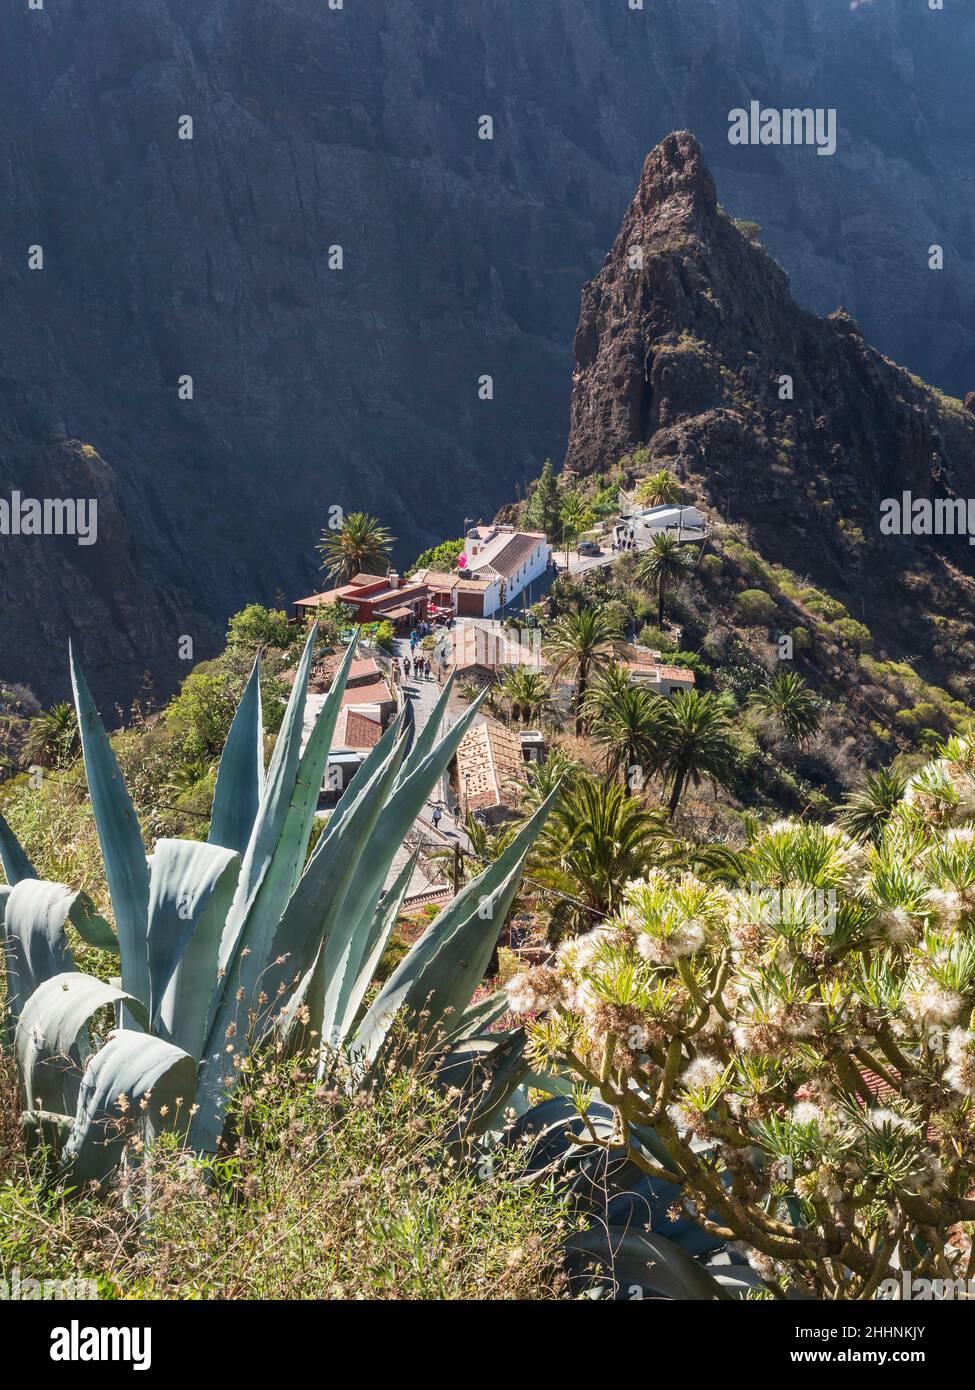 Masca Village, Teno Mountains, Tenerife, Iles Canaries. Banque D'Images